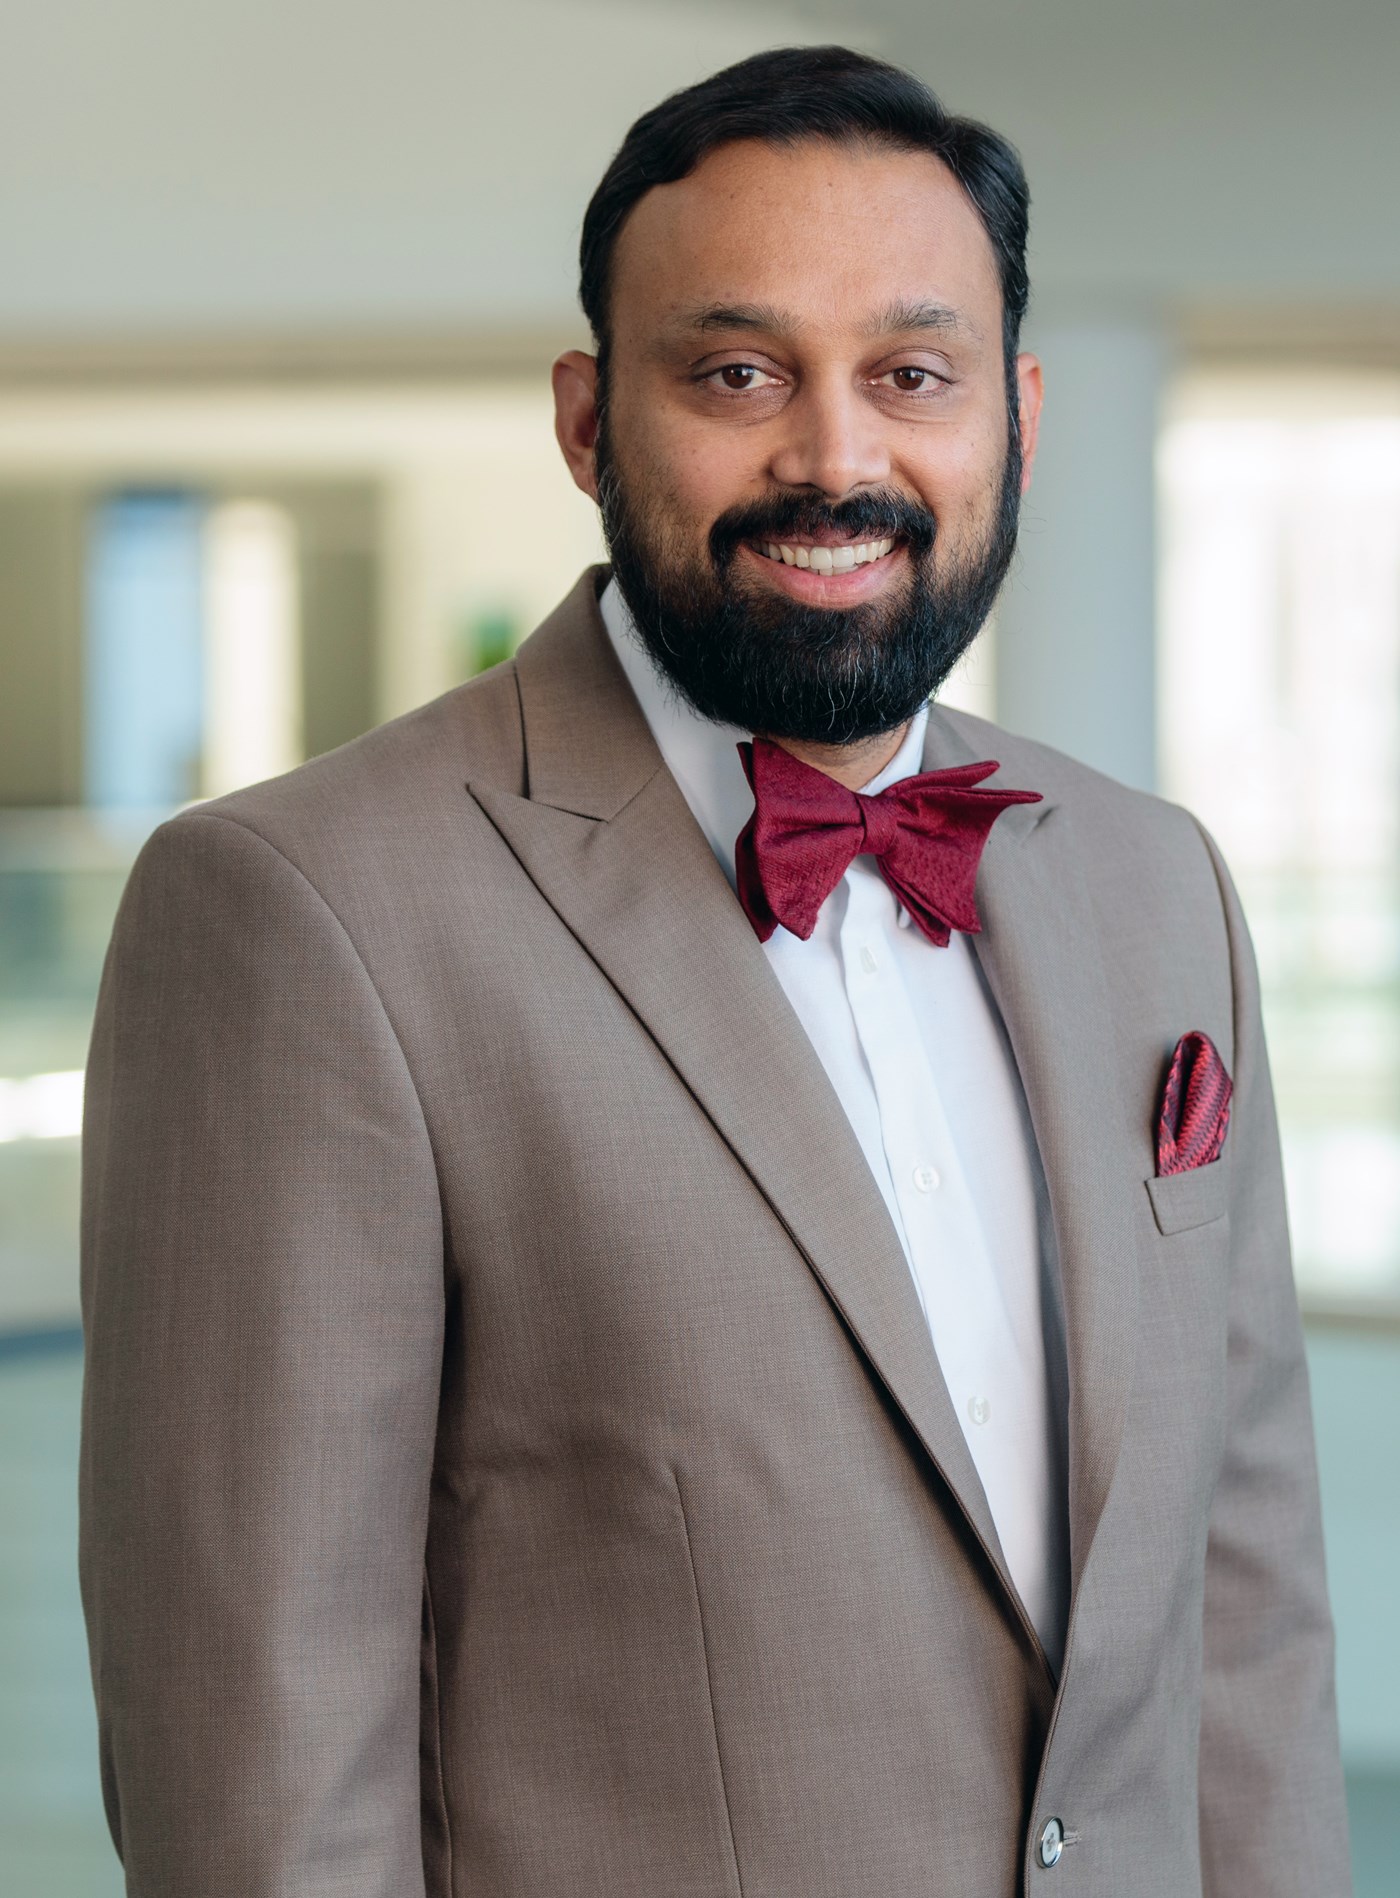 Sukesh Aghara is an Professor, Director - NEET, Director INSSL, Director - Nuclear Engineering in the Chemical Engineering Department at UMass Lowell.